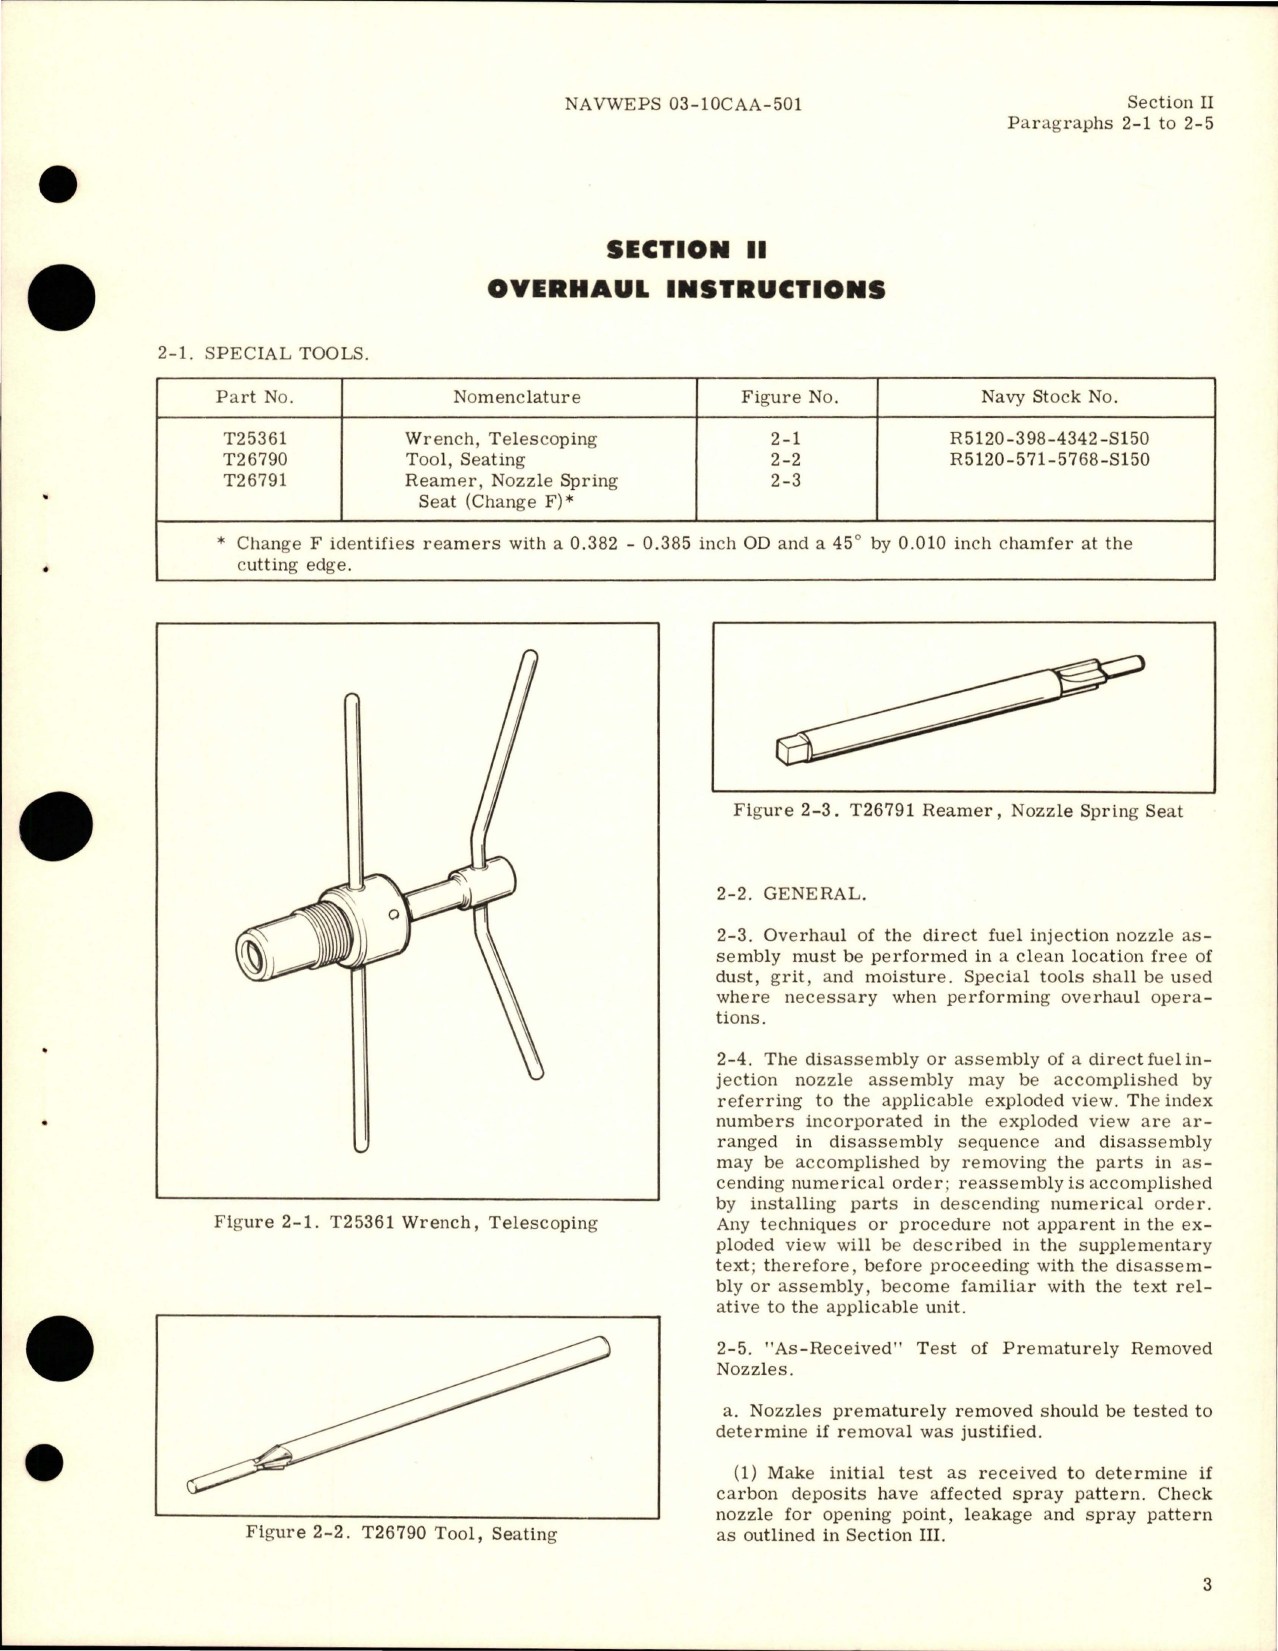 Sample page 7 from AirCorps Library document: Overhaul Instructions for Direct Fuel Injection Nozzles 